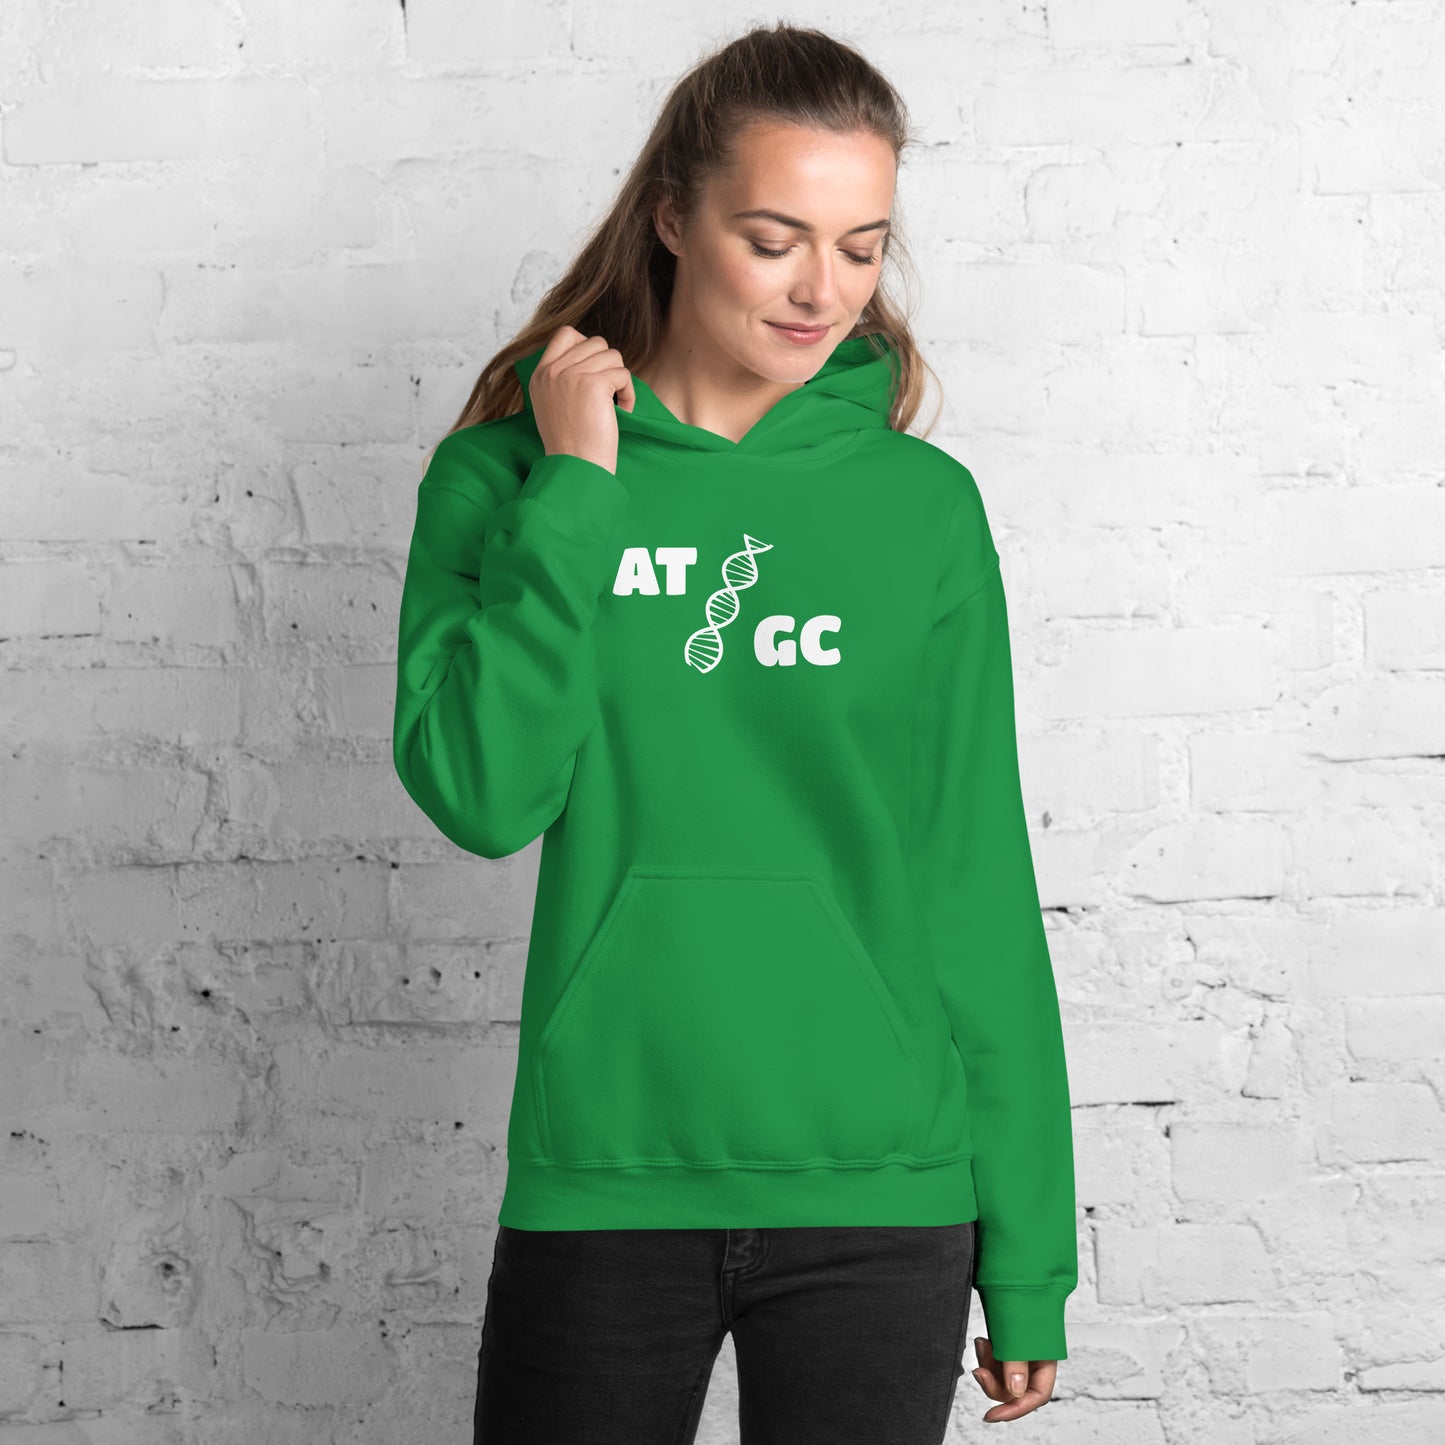 Women with Irish green hoodie with image of a DNA string and the text "ATGC"